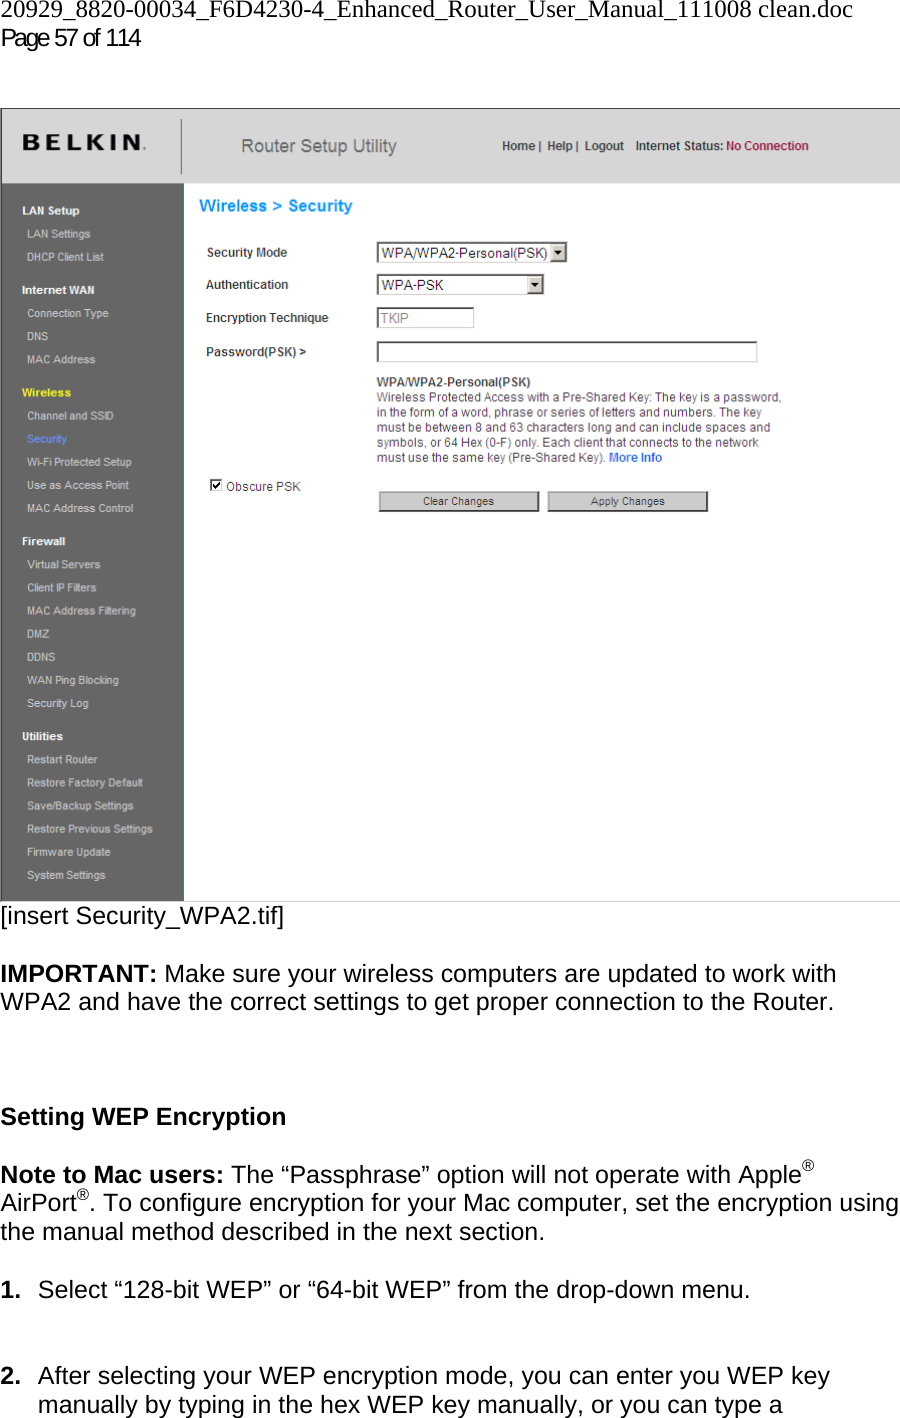 20929_8820-00034_F6D4230-4_Enhanced_Router_User_Manual_111008 clean.doc Page 57 of 114     [insert Security_WPA2.tif]  IMPORTANT: Make sure your wireless computers are updated to work with WPA2 and have the correct settings to get proper connection to the Router.    Setting WEP Encryption  Note to Mac users: The “Passphrase” option will not operate with Apple® AirPort®. To configure encryption for your Mac computer, set the encryption using the manual method described in the next section.  1.  Select “128-bit WEP” or “64-bit WEP” from the drop-down menu.   2.  After selecting your WEP encryption mode, you can enter you WEP key manually by typing in the hex WEP key manually, or you can type a 